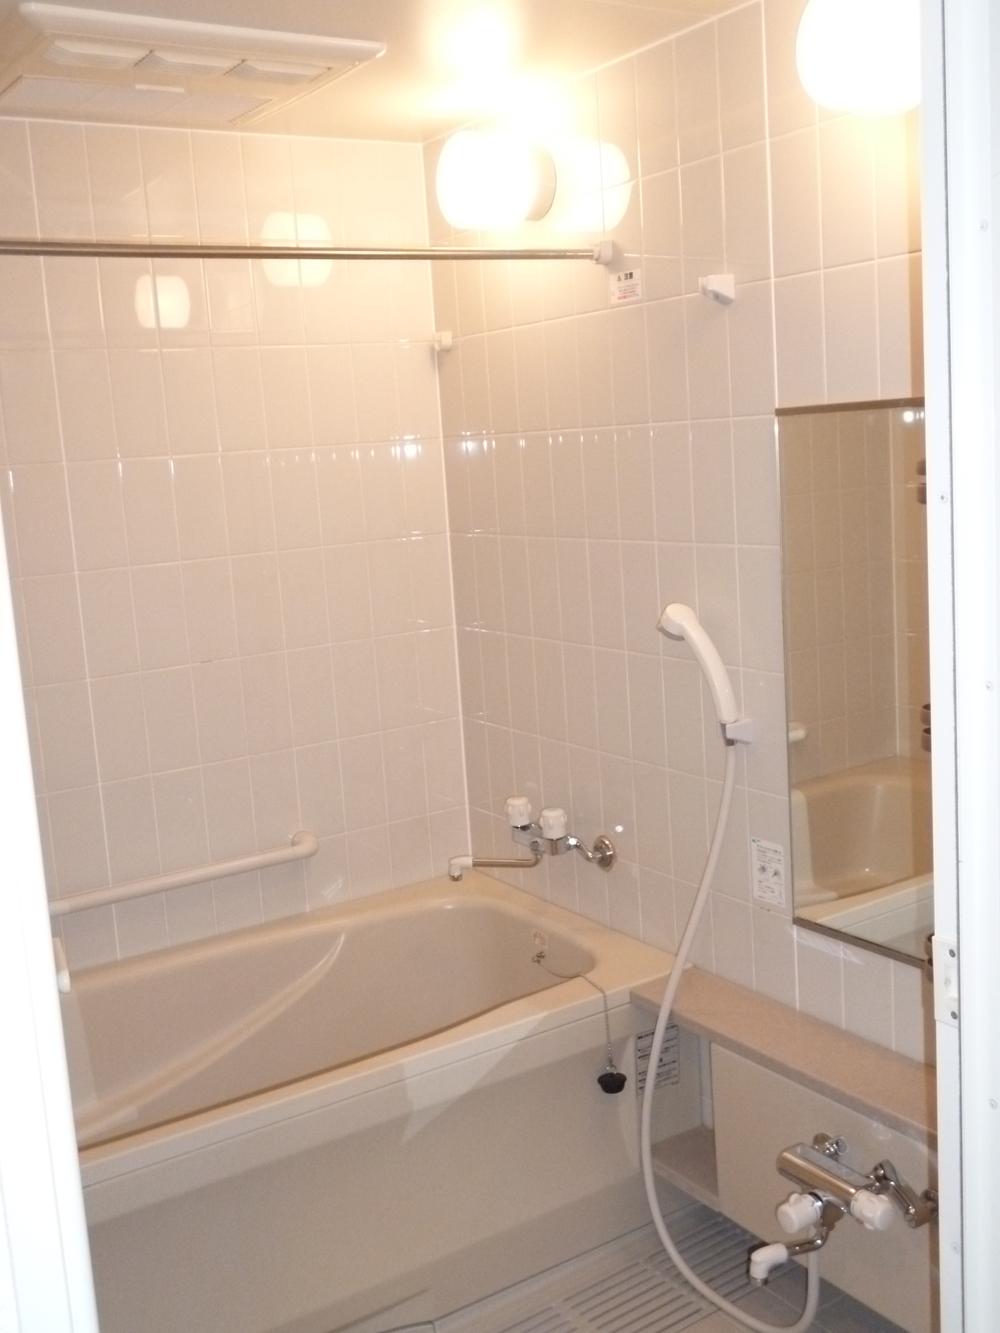 Bathroom. With bathroom heating dryer! With reheating function! !